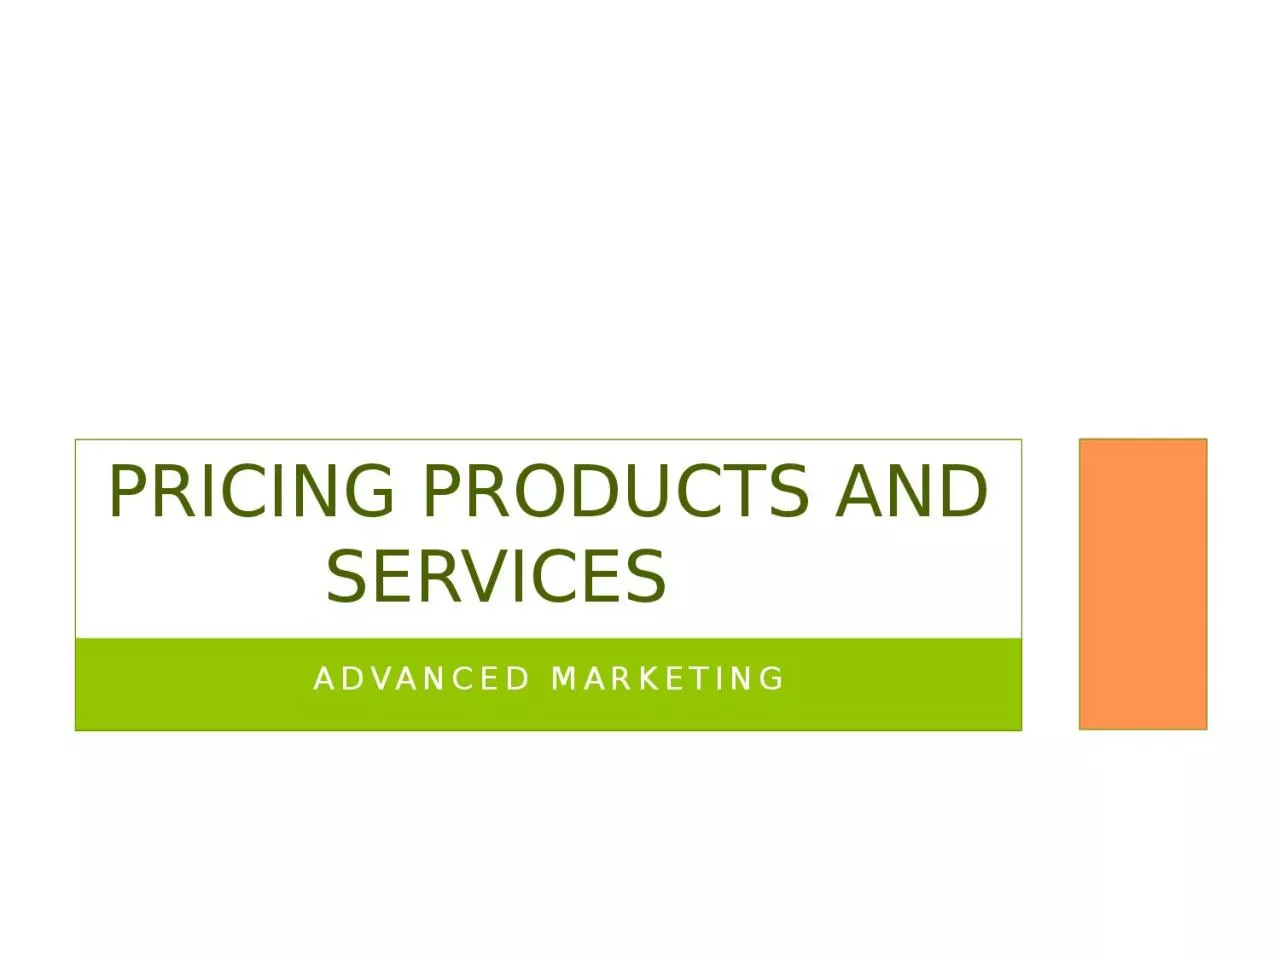 Advanced Marketing Pricing Products and Services